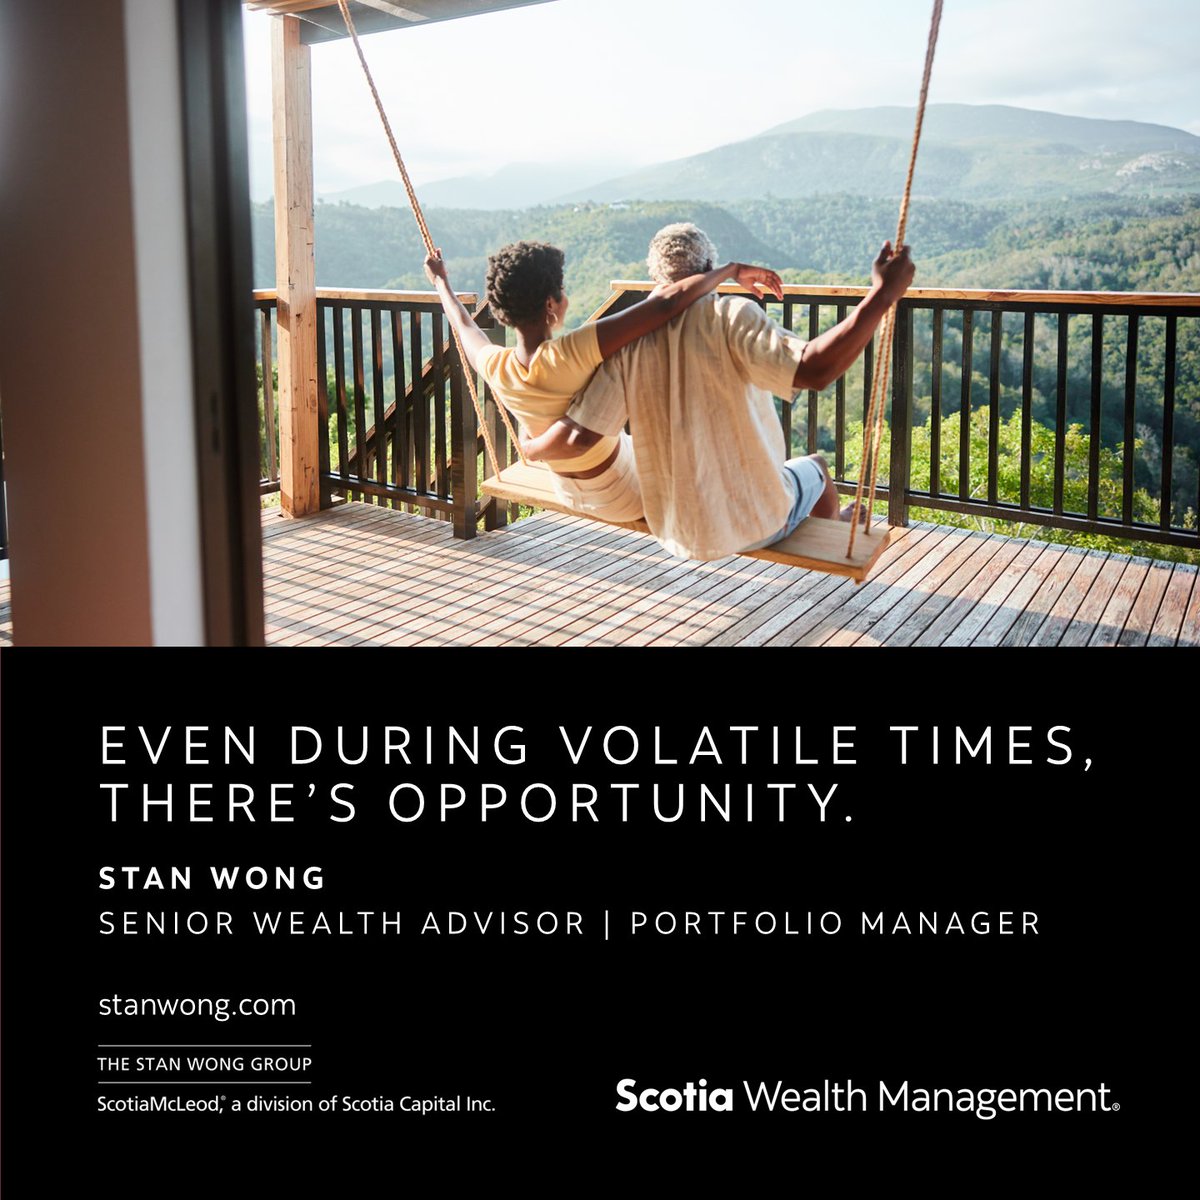 Let us provide a second opinion on your investment strategy to make sure your portfolio is on the right path. Email us at stanwonggroup@scotiawealth.com or visit stanwong.com/secondopinion to learn more.

#WealthManagement #SecondOpinion #TheStanWongGroup